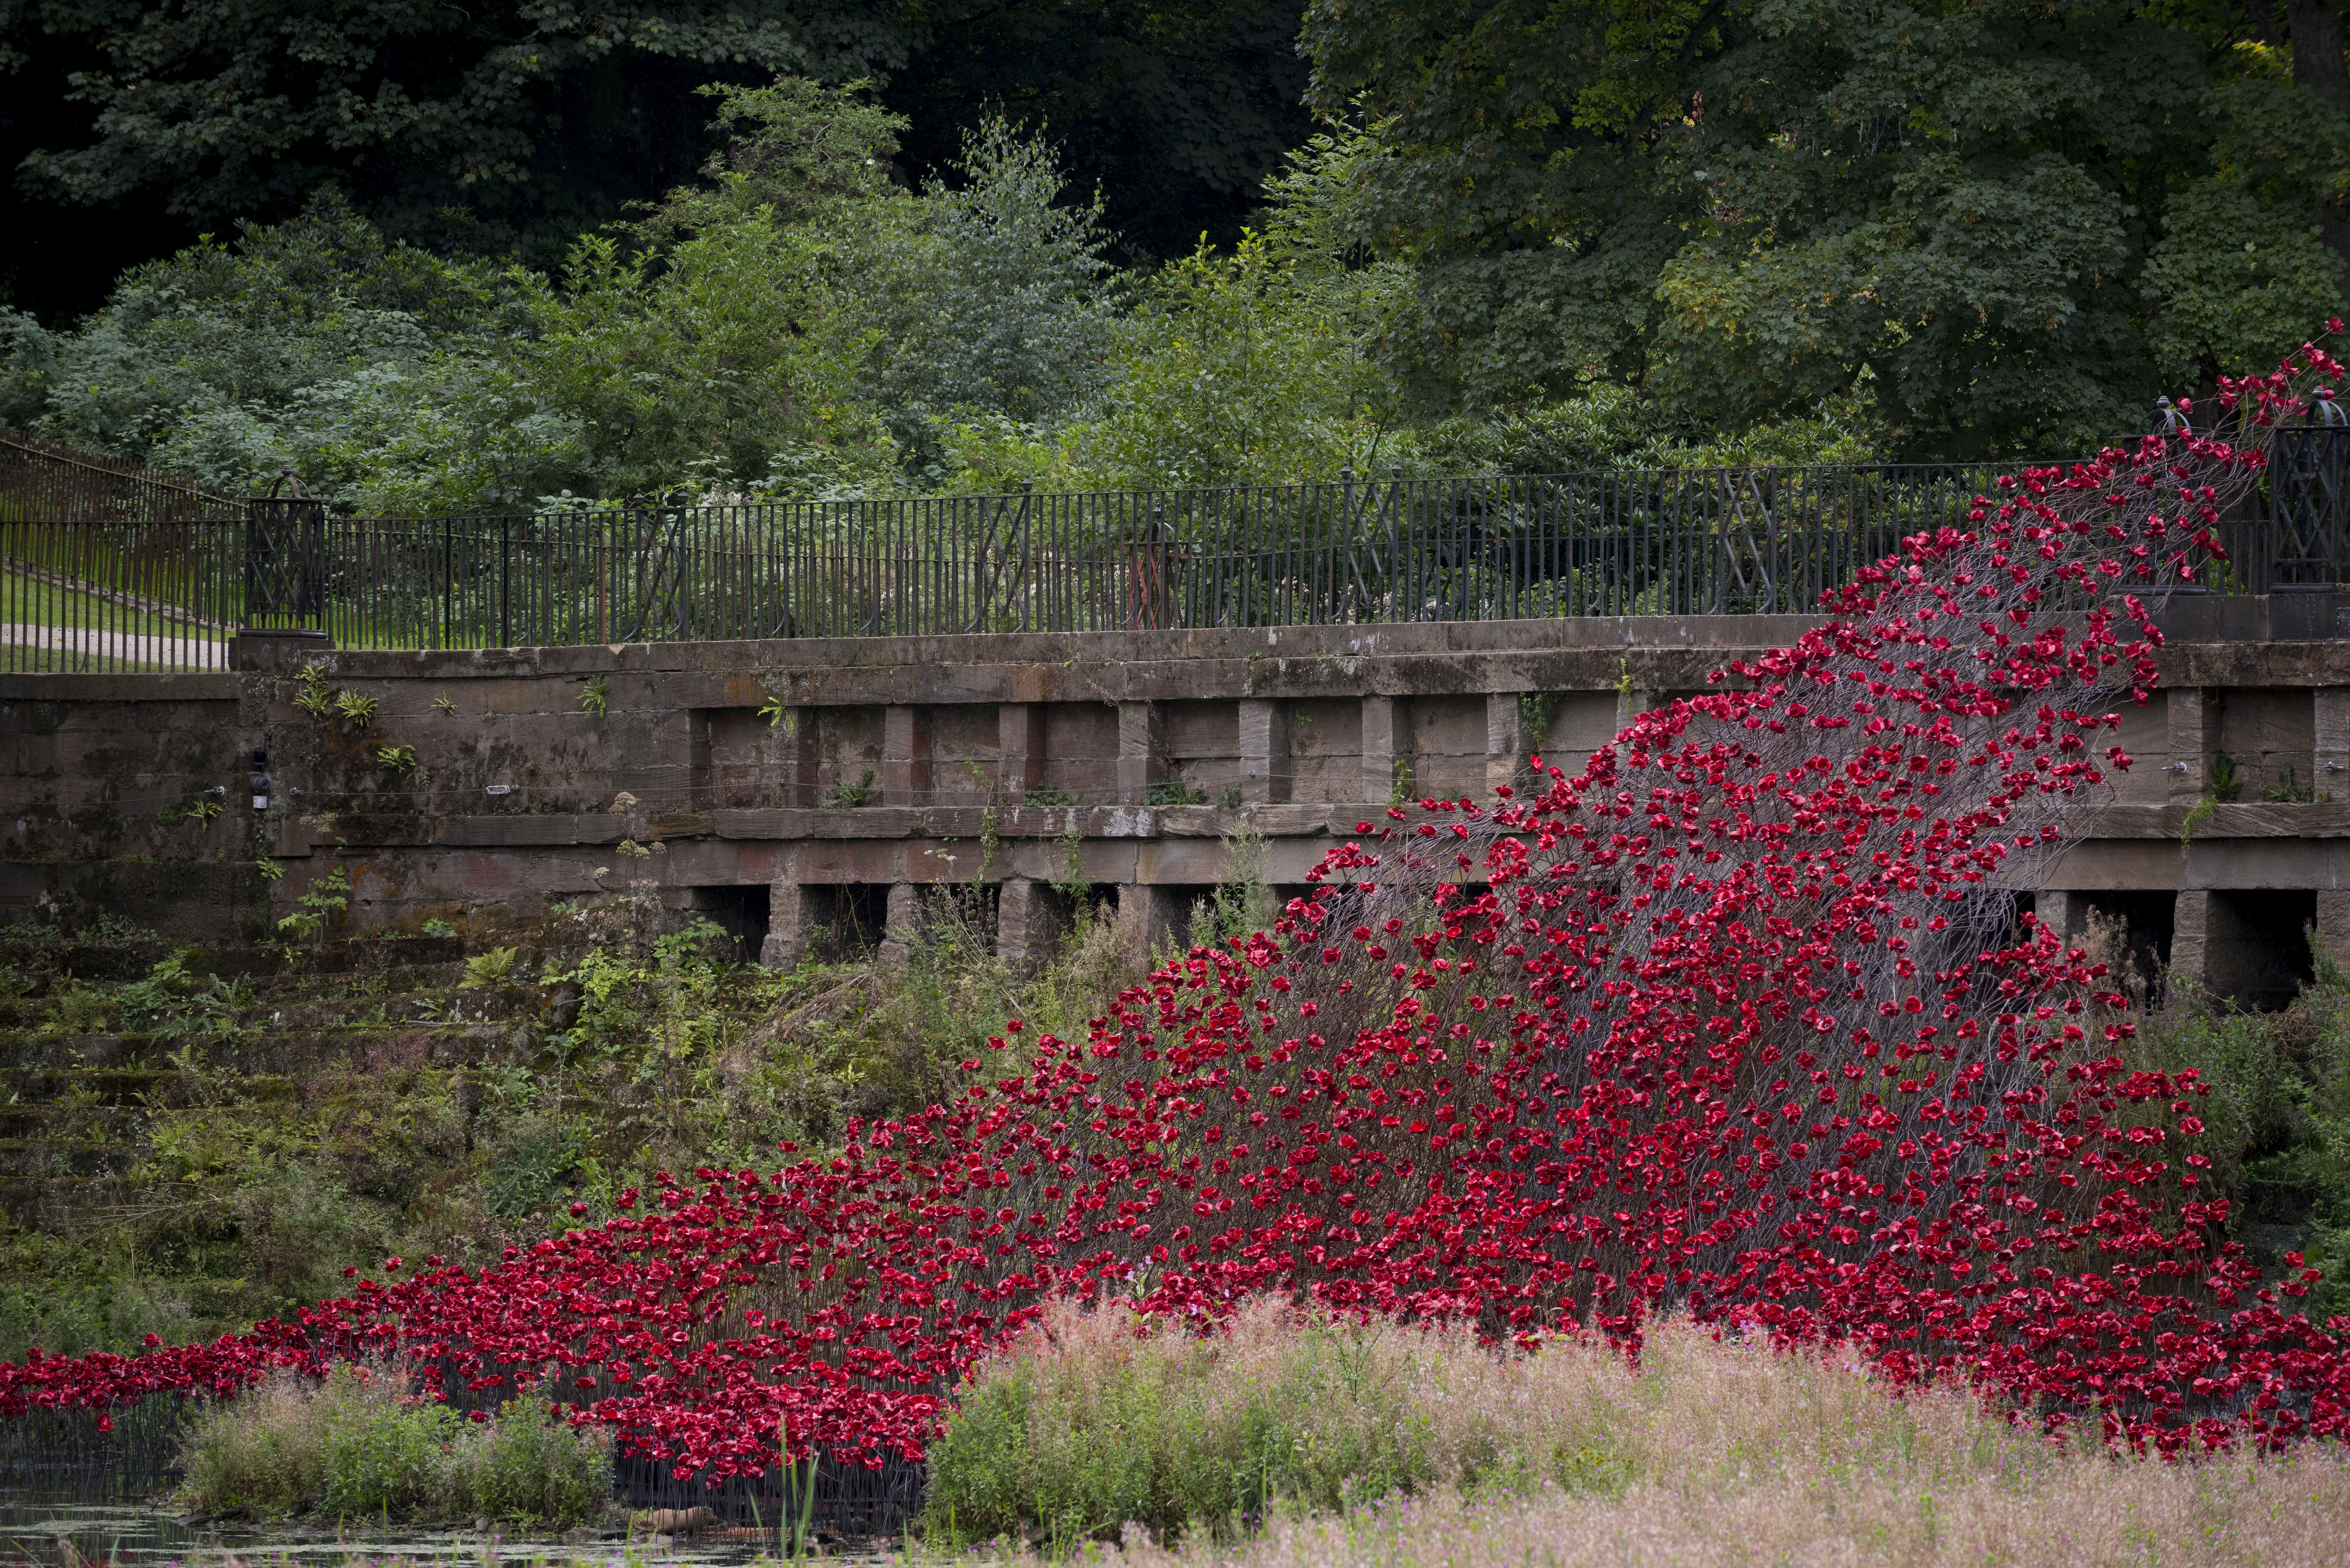 A cascade of red poppies flowing over a bridge into a lake.